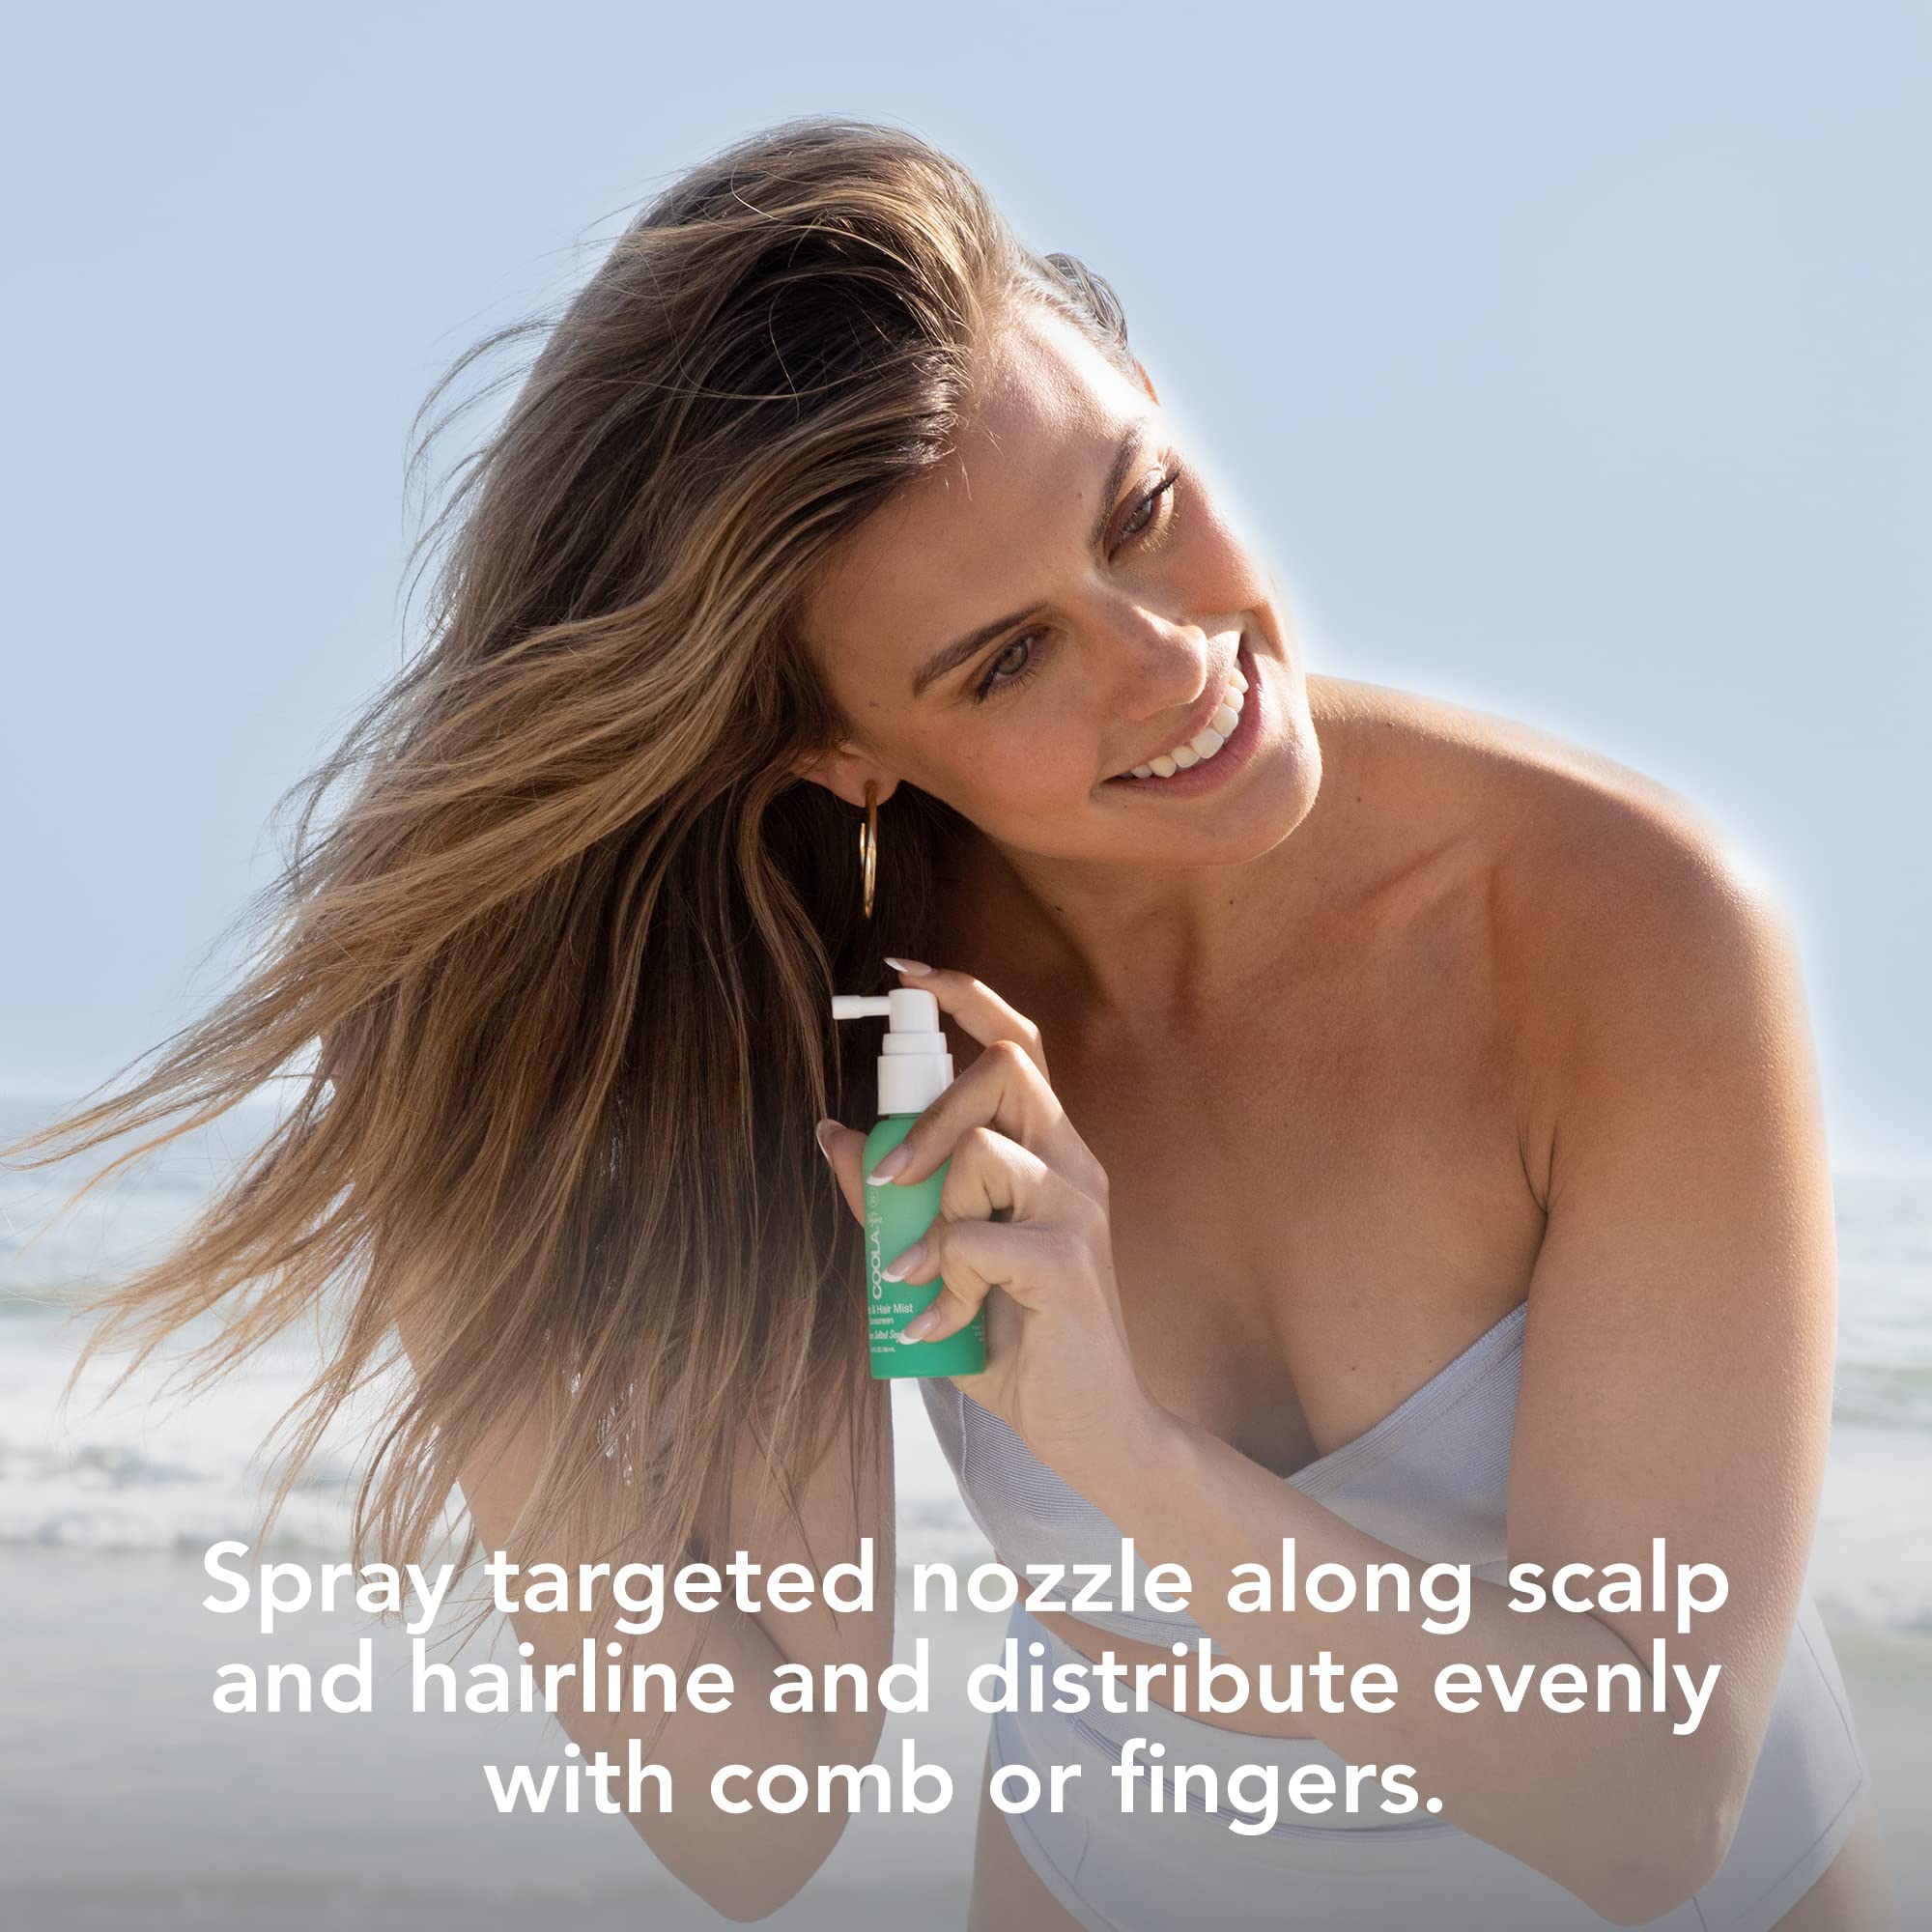 COOLA Organic Scalp Spray & Hair Sunscreen Mist With SPF 30, Dermatologist Tested Hair Care For Daily Protection, Vegan And Gluten Free, Ocean Salted Sage, 2 Fl Oz